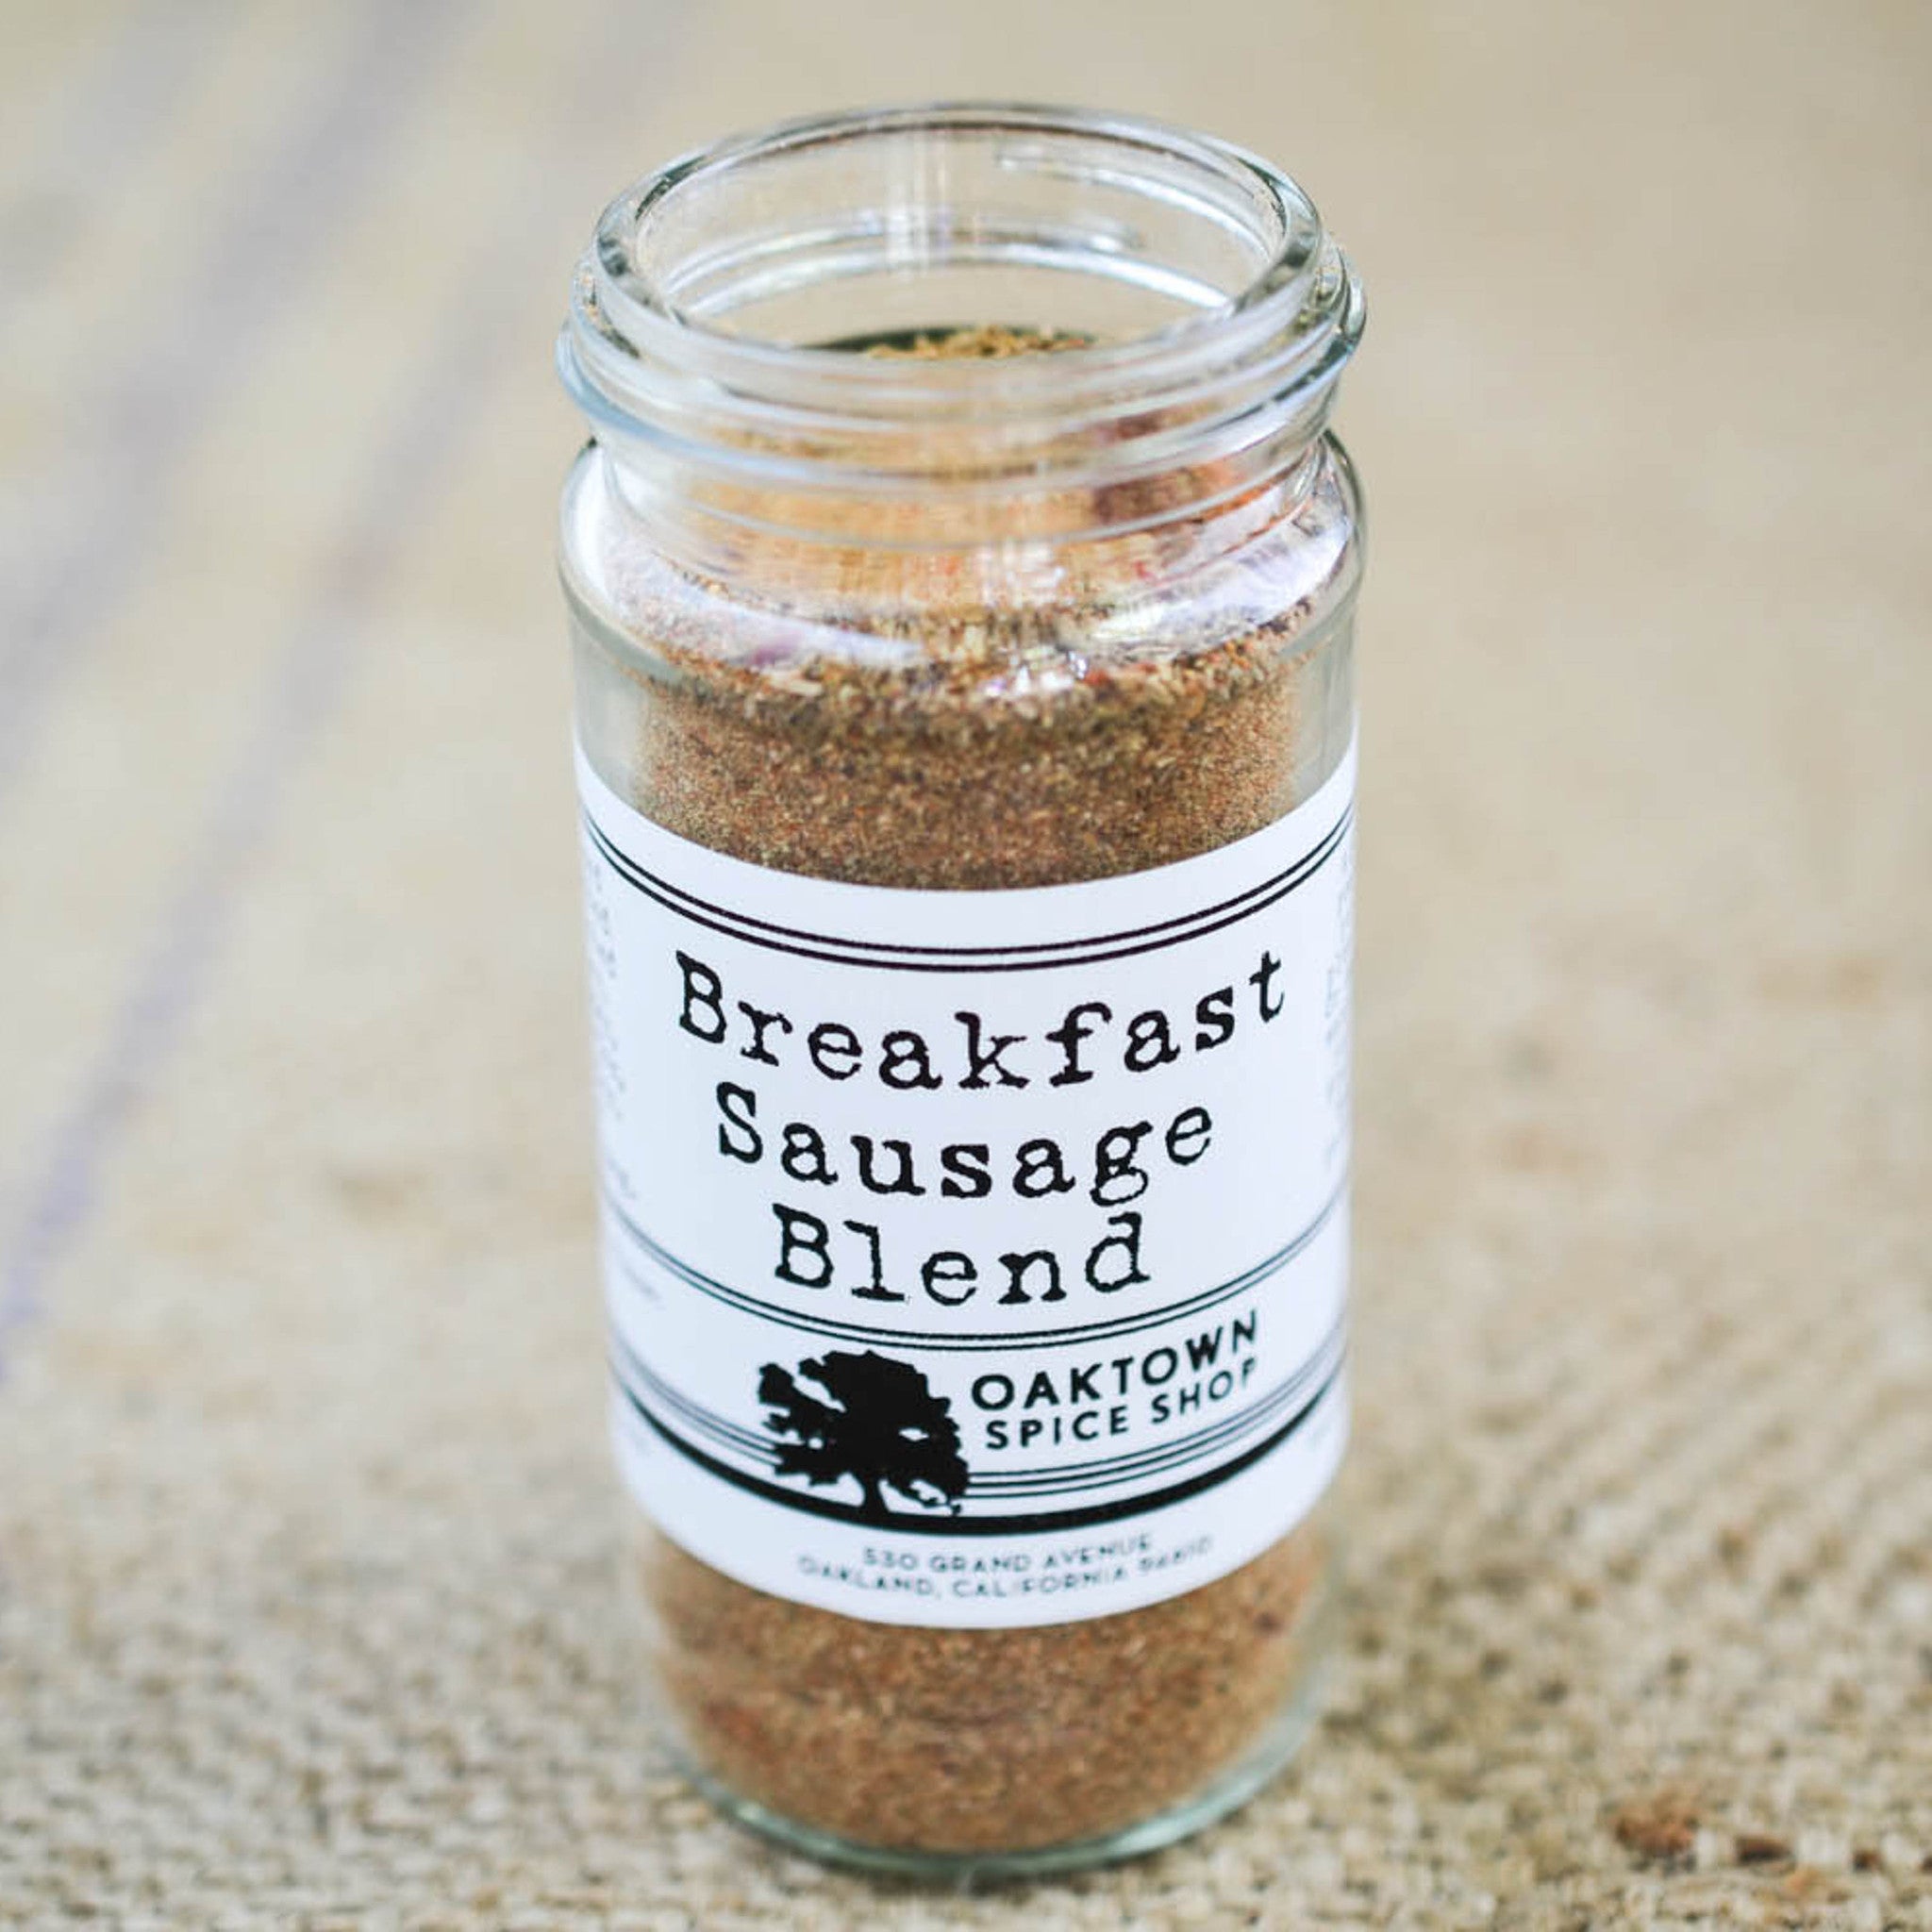 Breakfast Sausage Seasoning used to Make Your Own Sausage Patties or Sausage Gravy by Oaktown Spice Shop